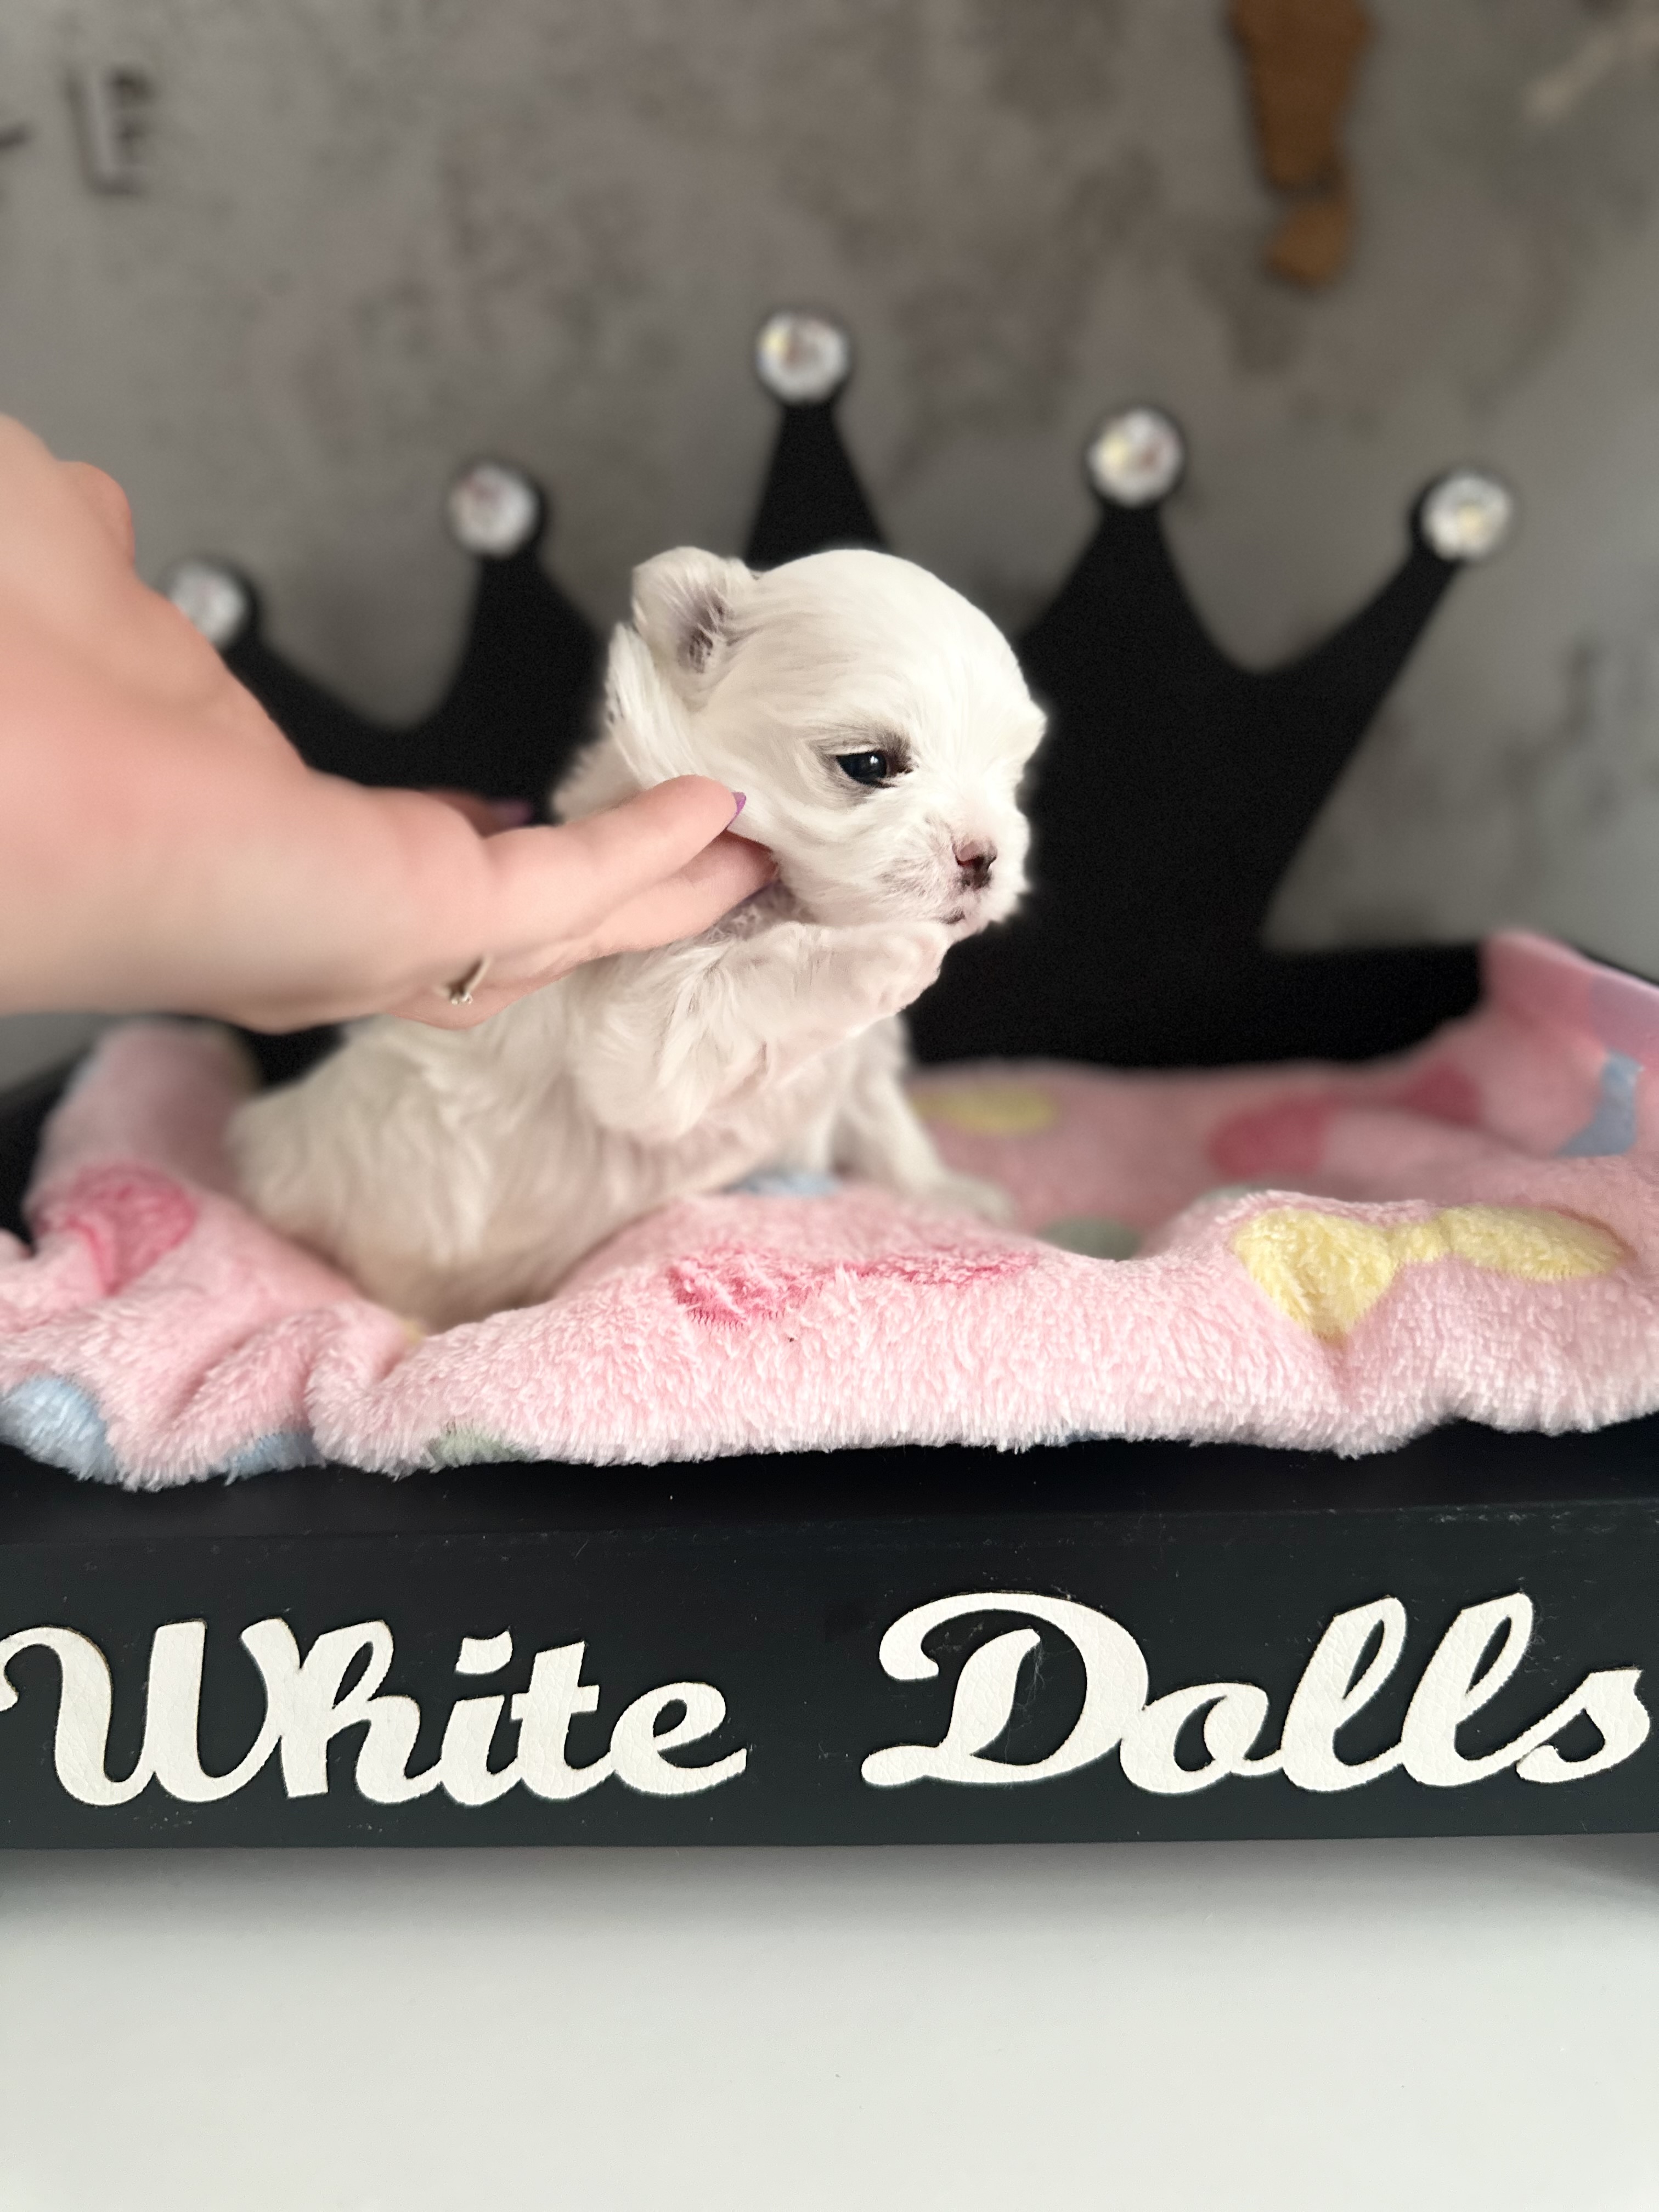 Korean Maltese Sweet baby comes from Top lines